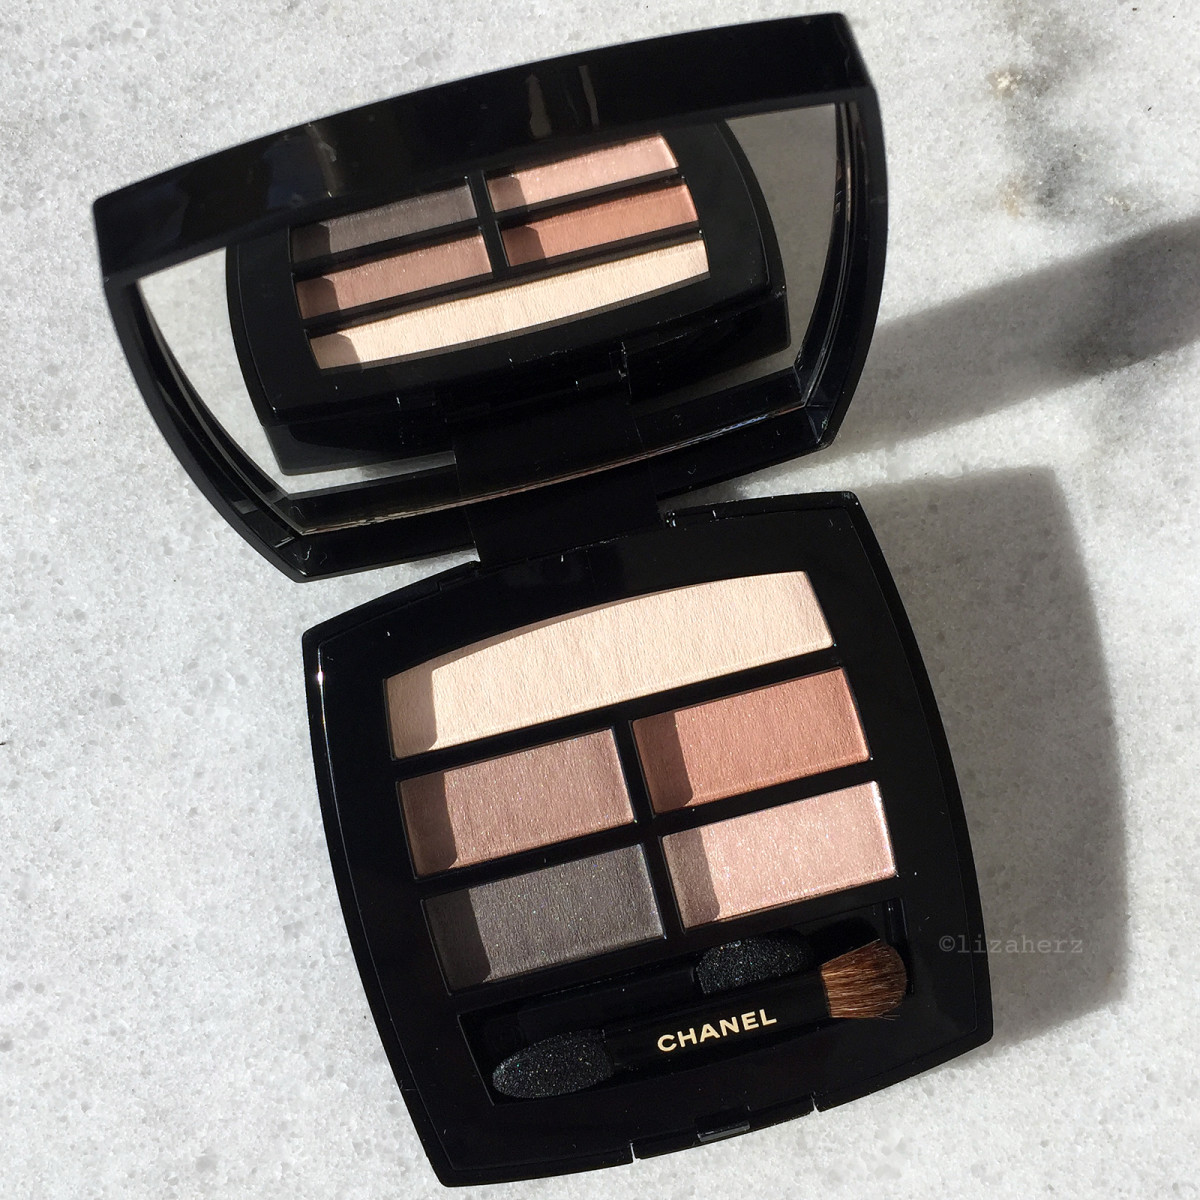 CHANEL LES BEIGES EYESHADOW PALETTE & FOUNDATION CUSHION COMING